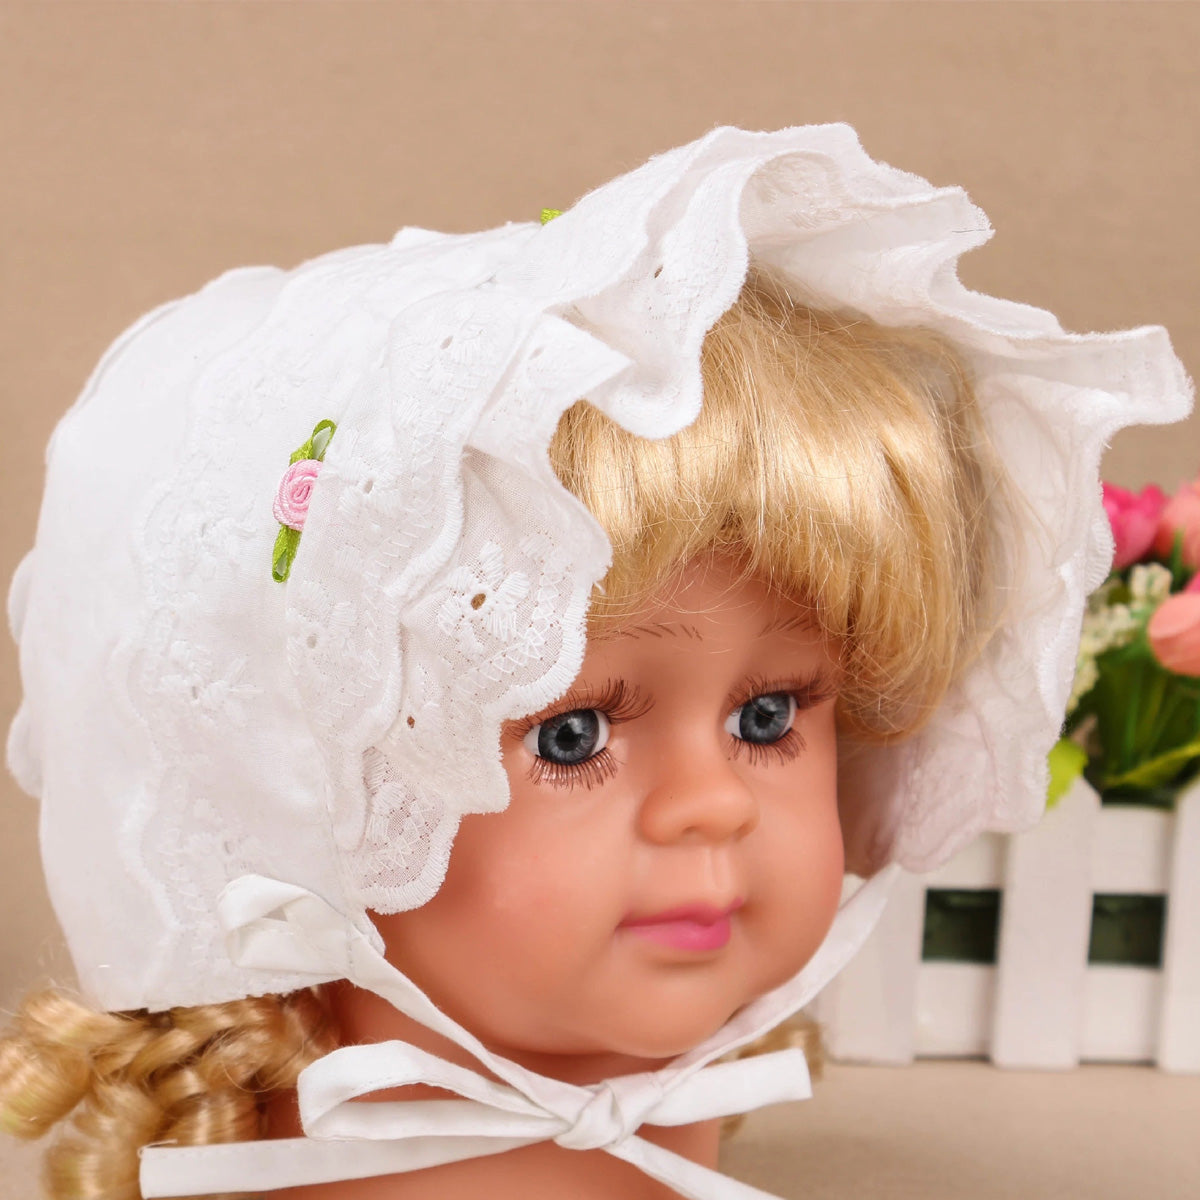 Baby Girls Cotton Cap Double Brimmed Eyelet Lace Bonnet with Flowers